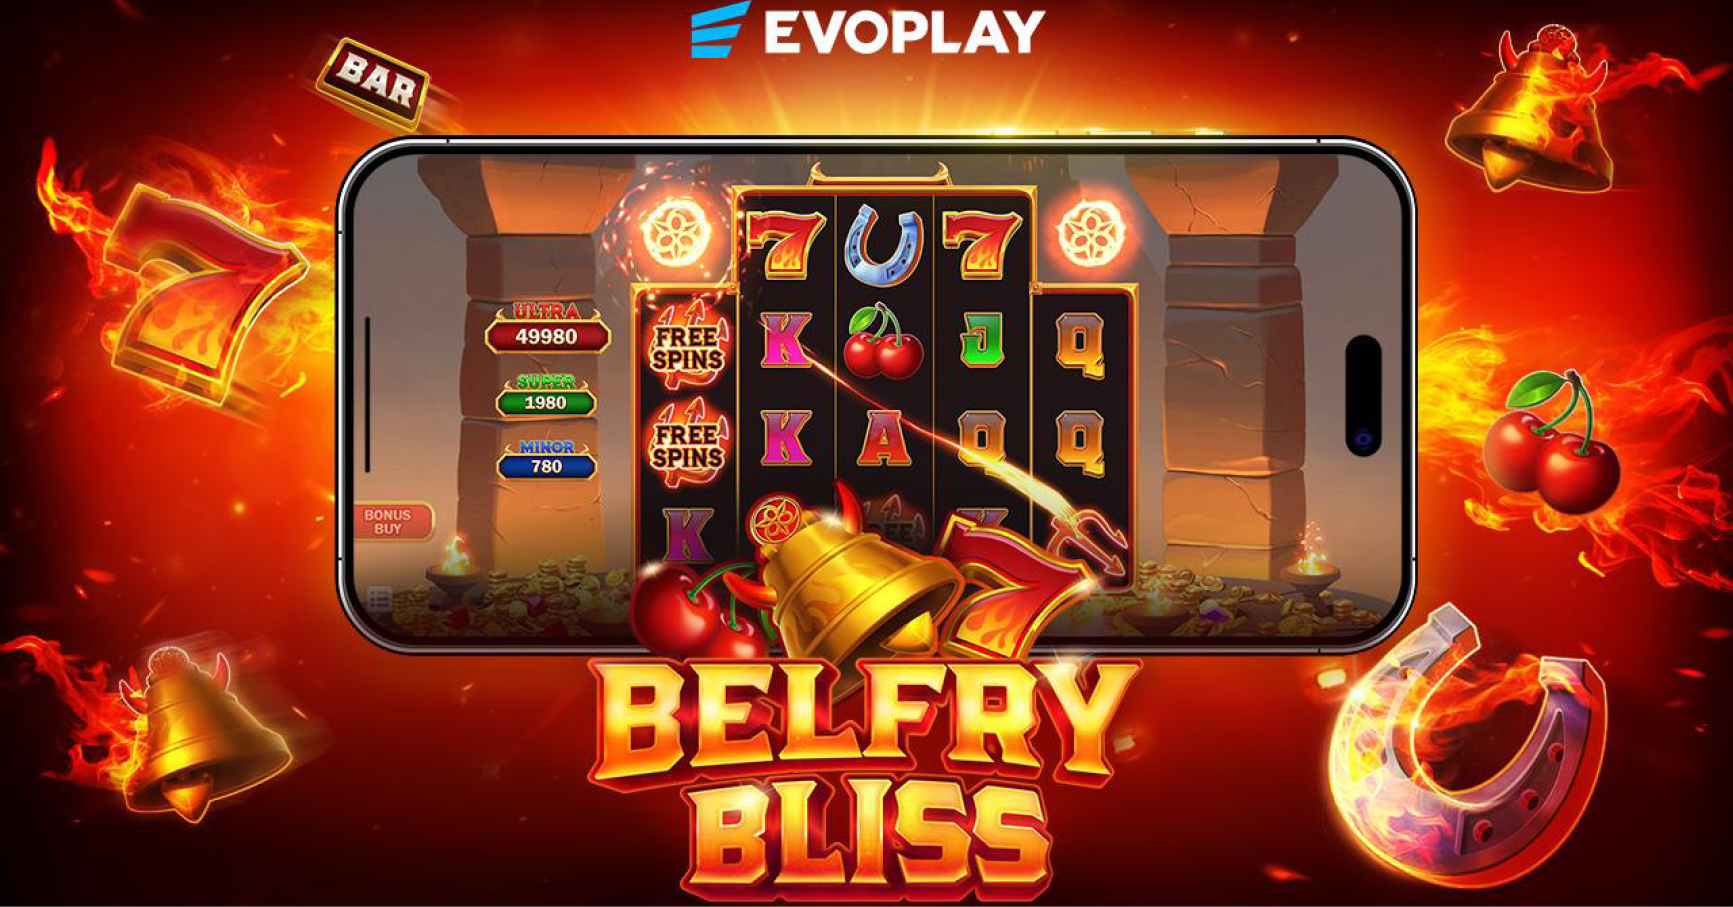 Evoplay presents inferno of blazing riches in Belfry Bliss